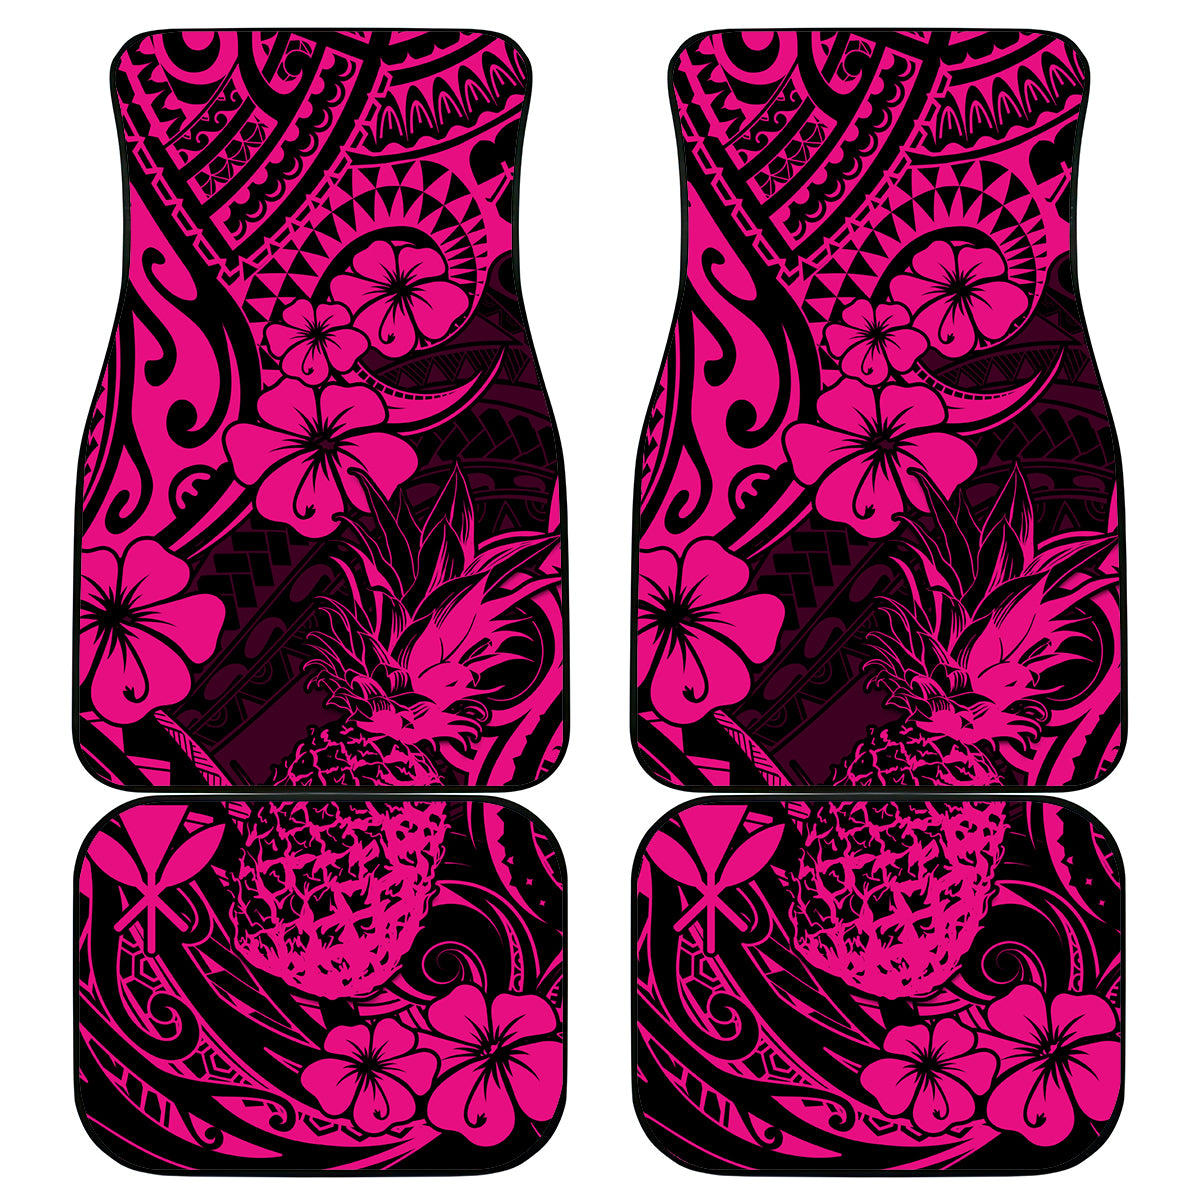 Hawaii Pineapple Car Mats Paradise Flowers Pacific With Pink Polynesian Tribal LT01 Pink - Polynesian Pride